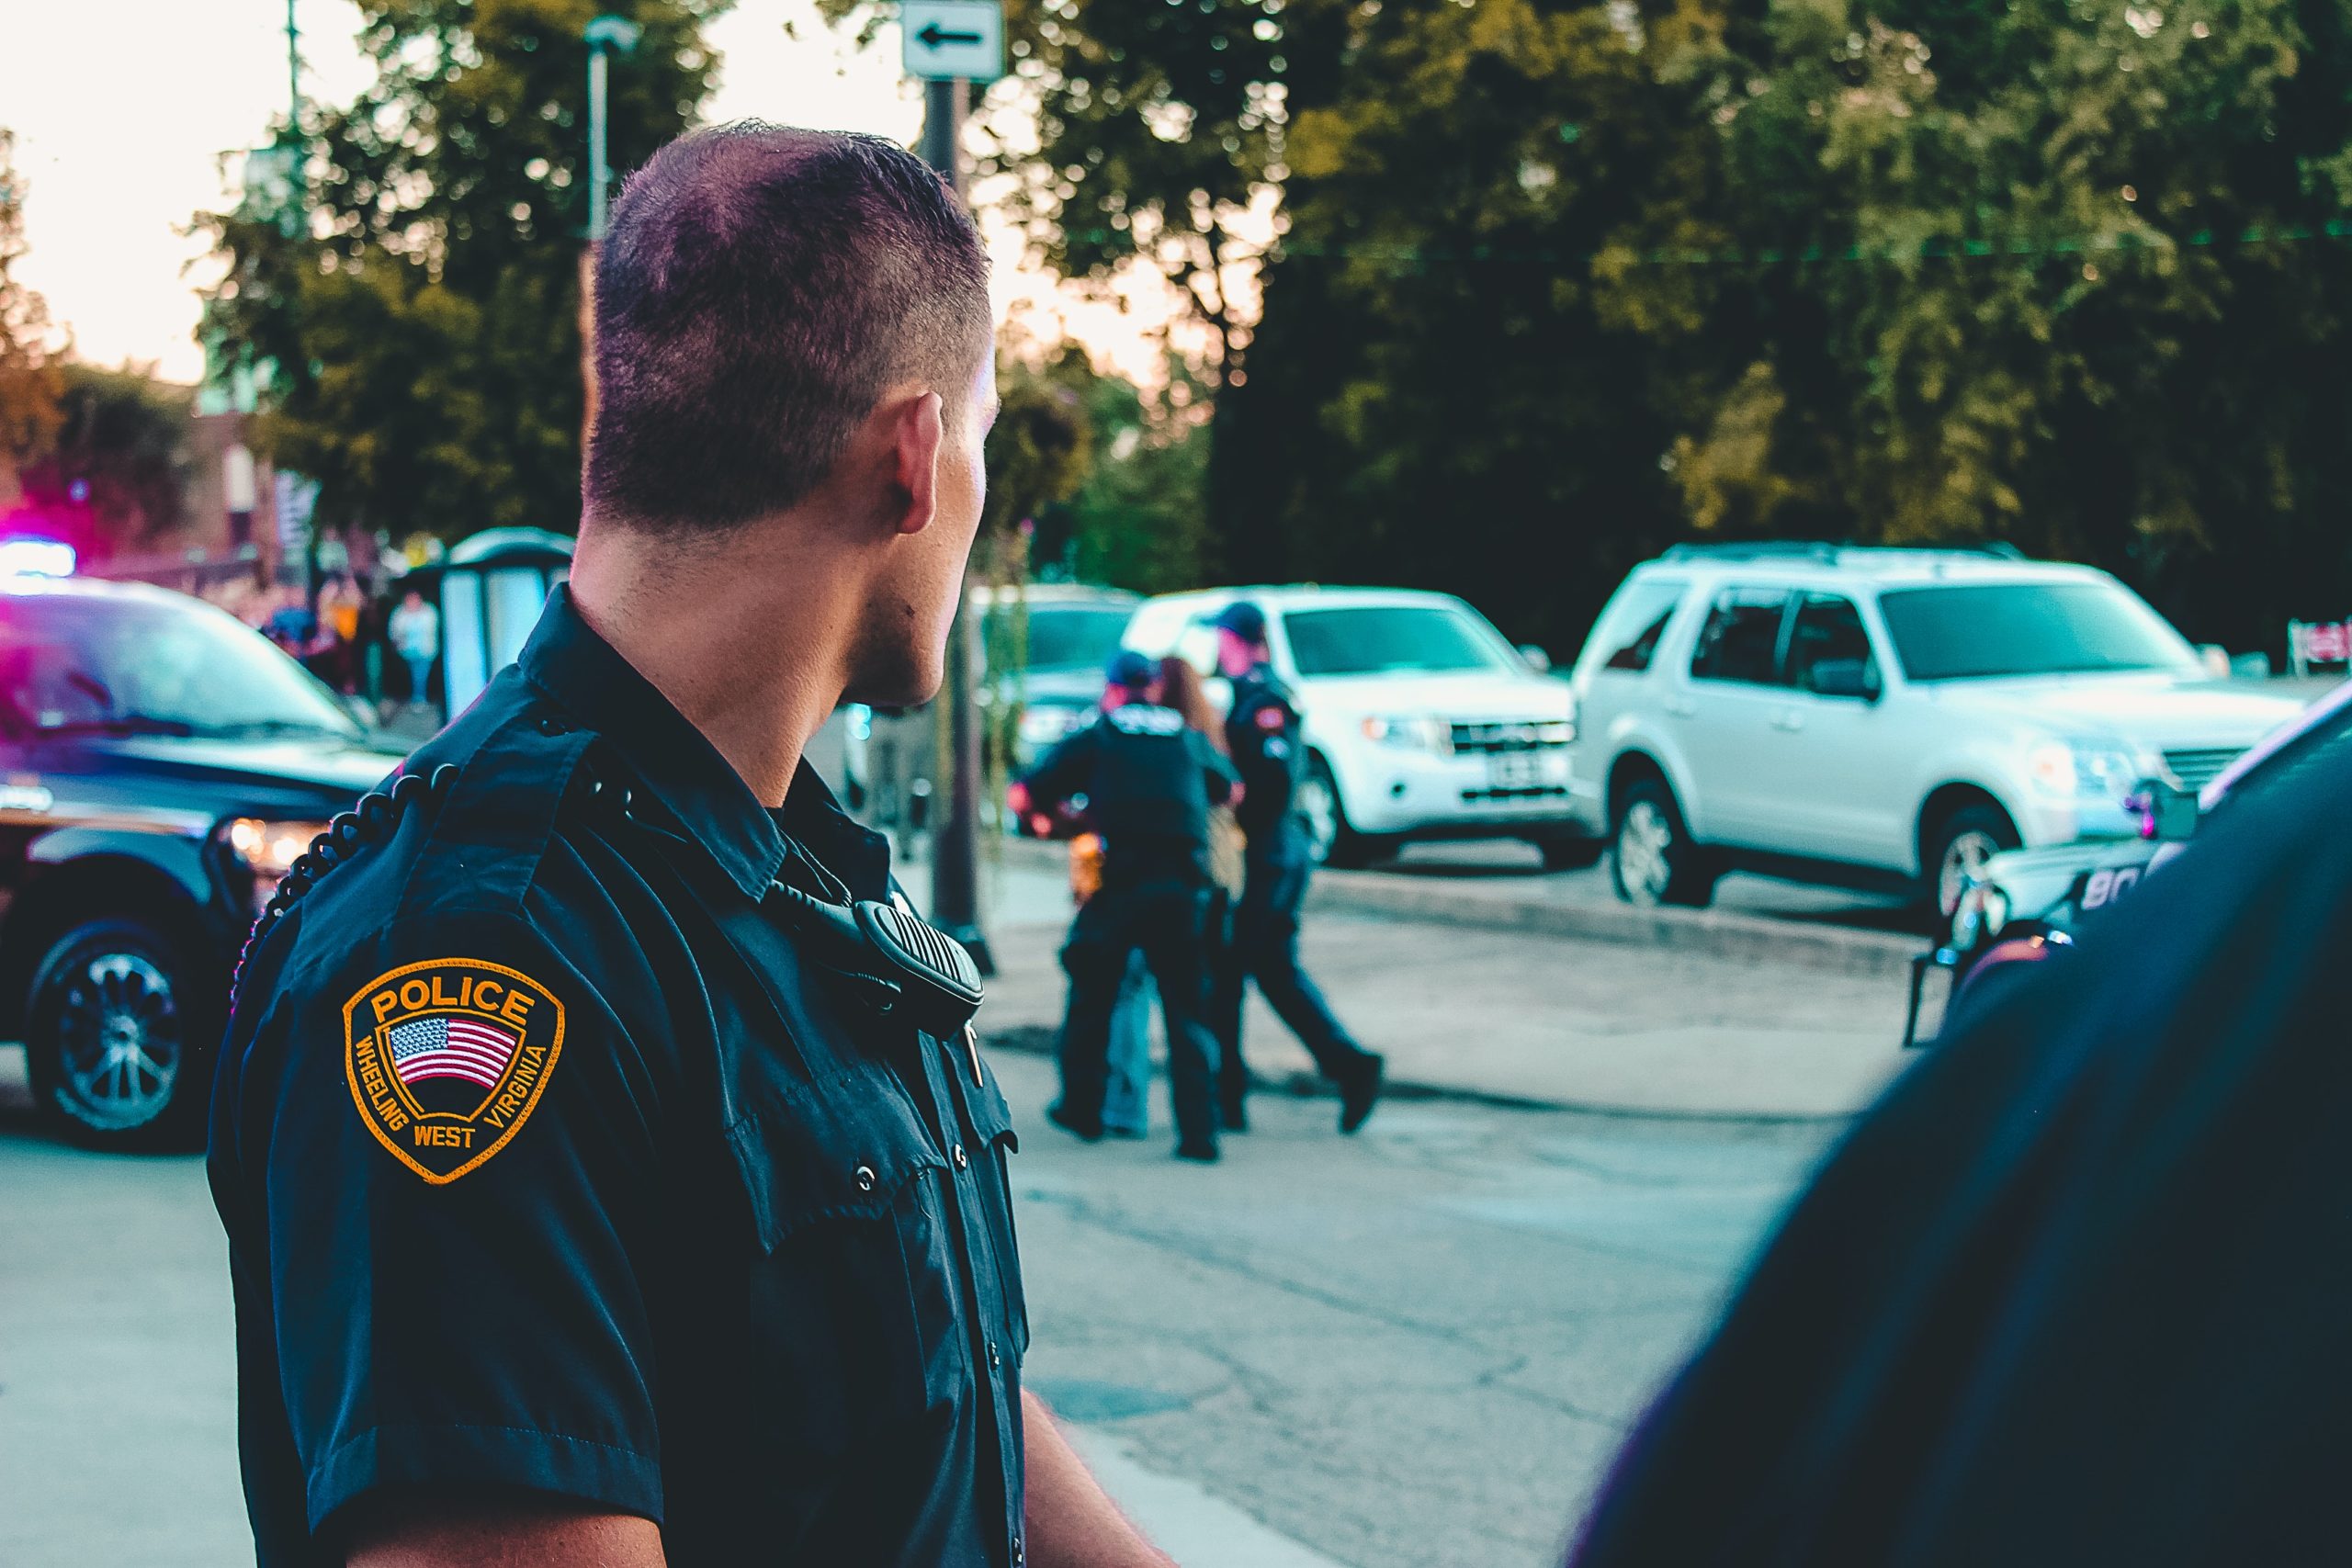 Reasonable Suspicion Vs. Probable Cause: What You Need To Know